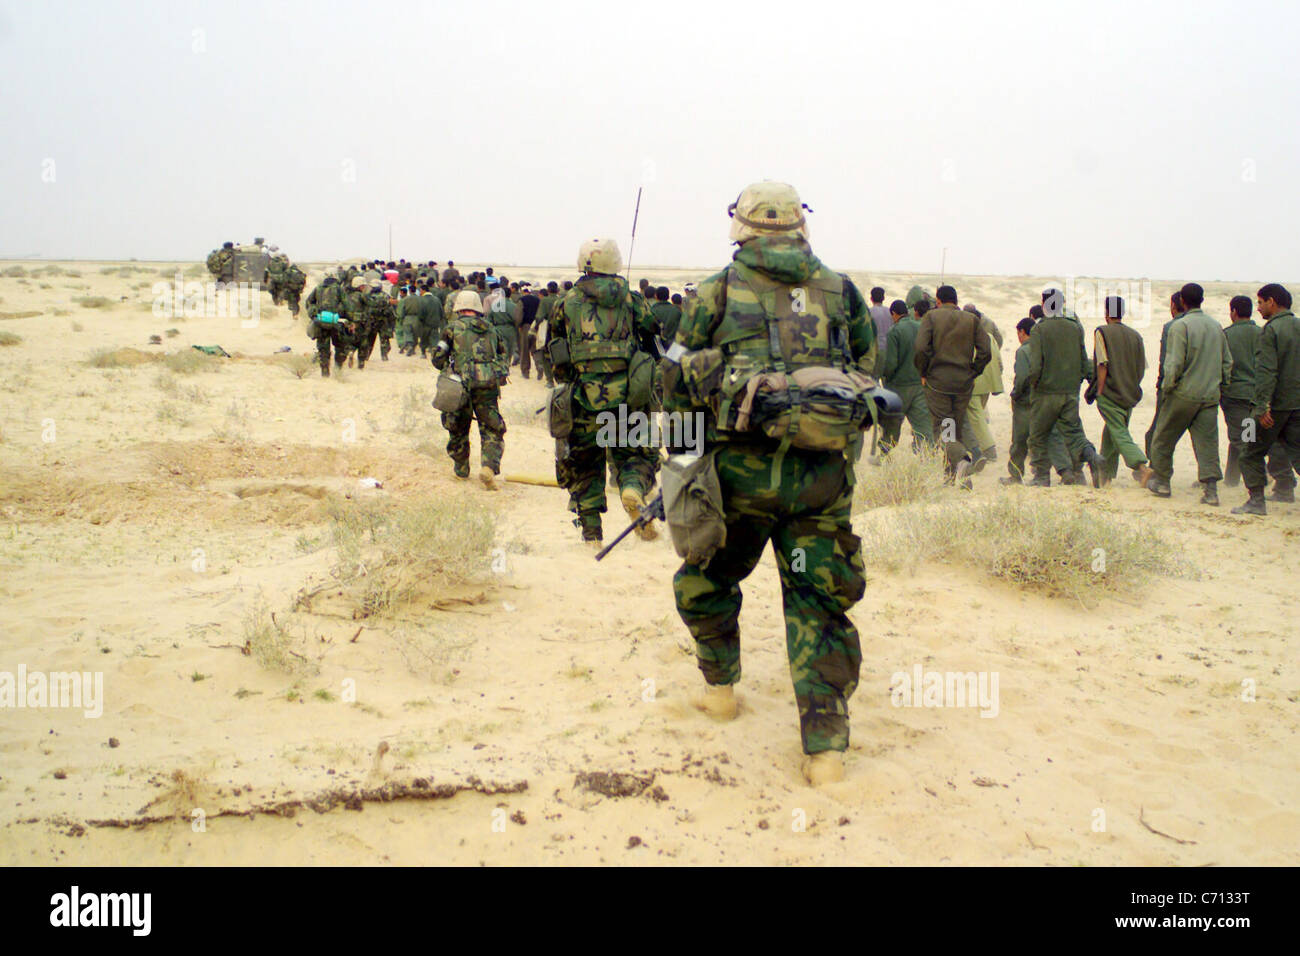 U.S. Marines from the 2nd Battalion, 1st Marine Regiment escort captured enemy prisoners of war to a holding area in the desert of Iraq on March 21, 2003, during Operation Iraqi Freedom. Operation Iraqi Freedom is the multinational coalition effort to liberate the Iraqi people, eliminate Iraq's weapons of mass destruction and end the regime of Saddam Hussein. DoD photo by Lance Cpl. Brian L. Wickliffe, U.S. Marine Corps. Stock Photo